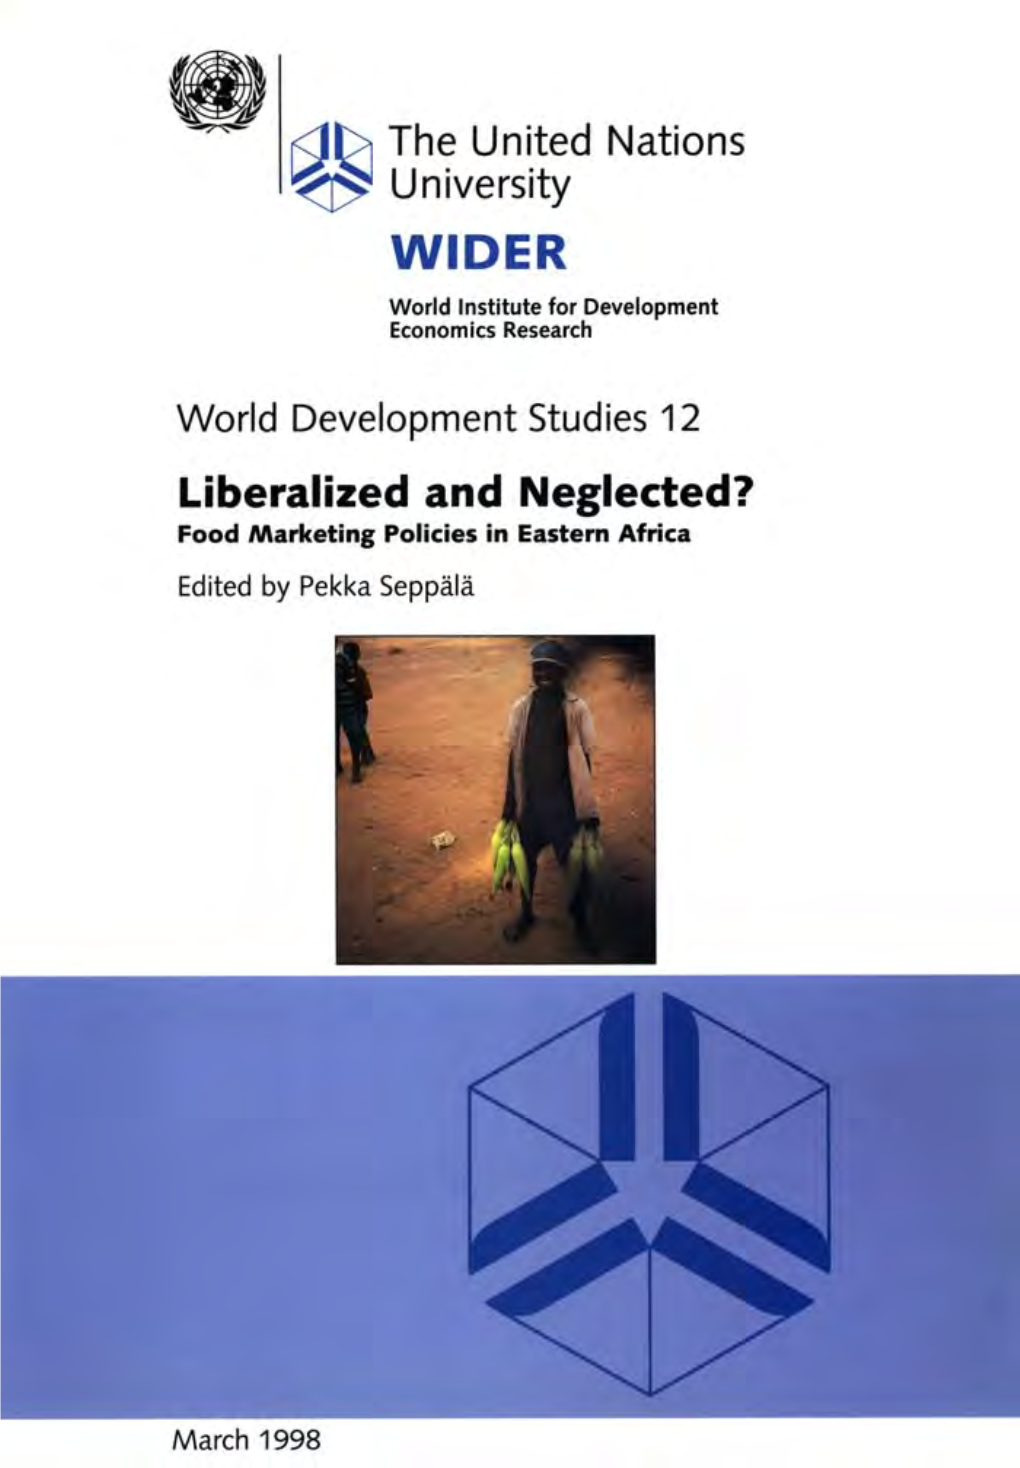 Liberalized and Neglected? Food Marketing Policies in Eastern Africa, Fills an Important Gap in Our Knowledge